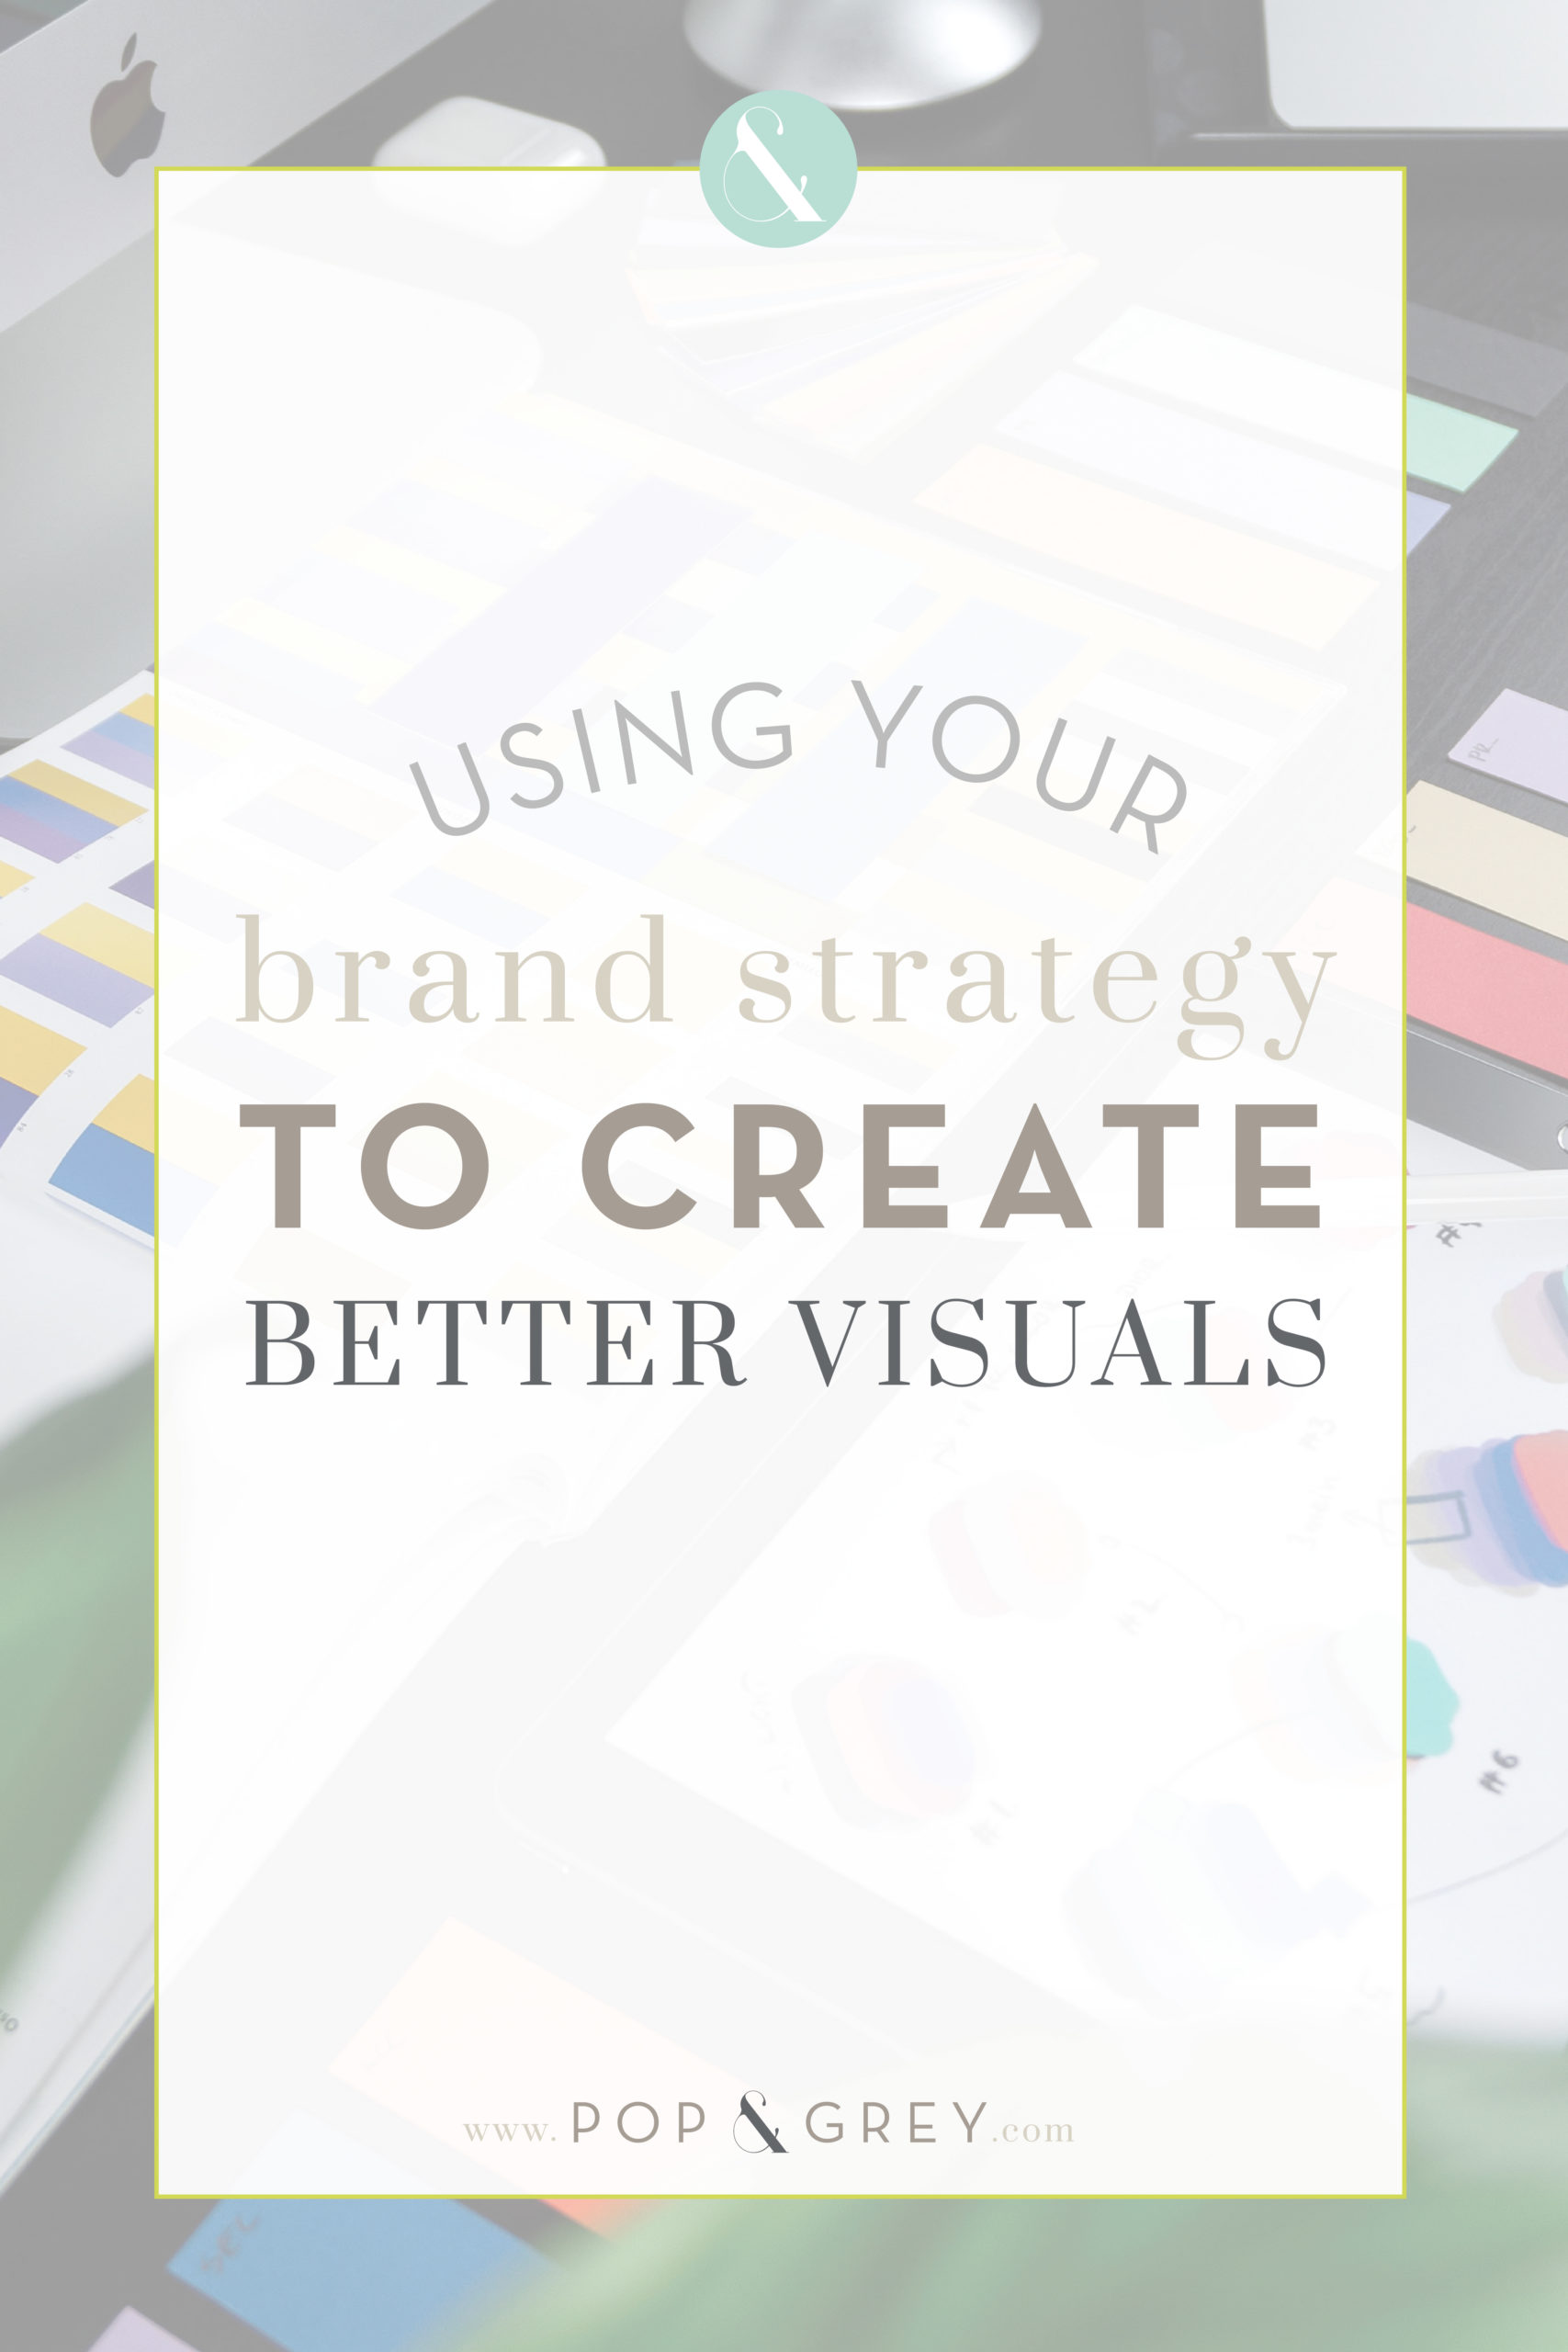 Using your brand strategy to create better visuals